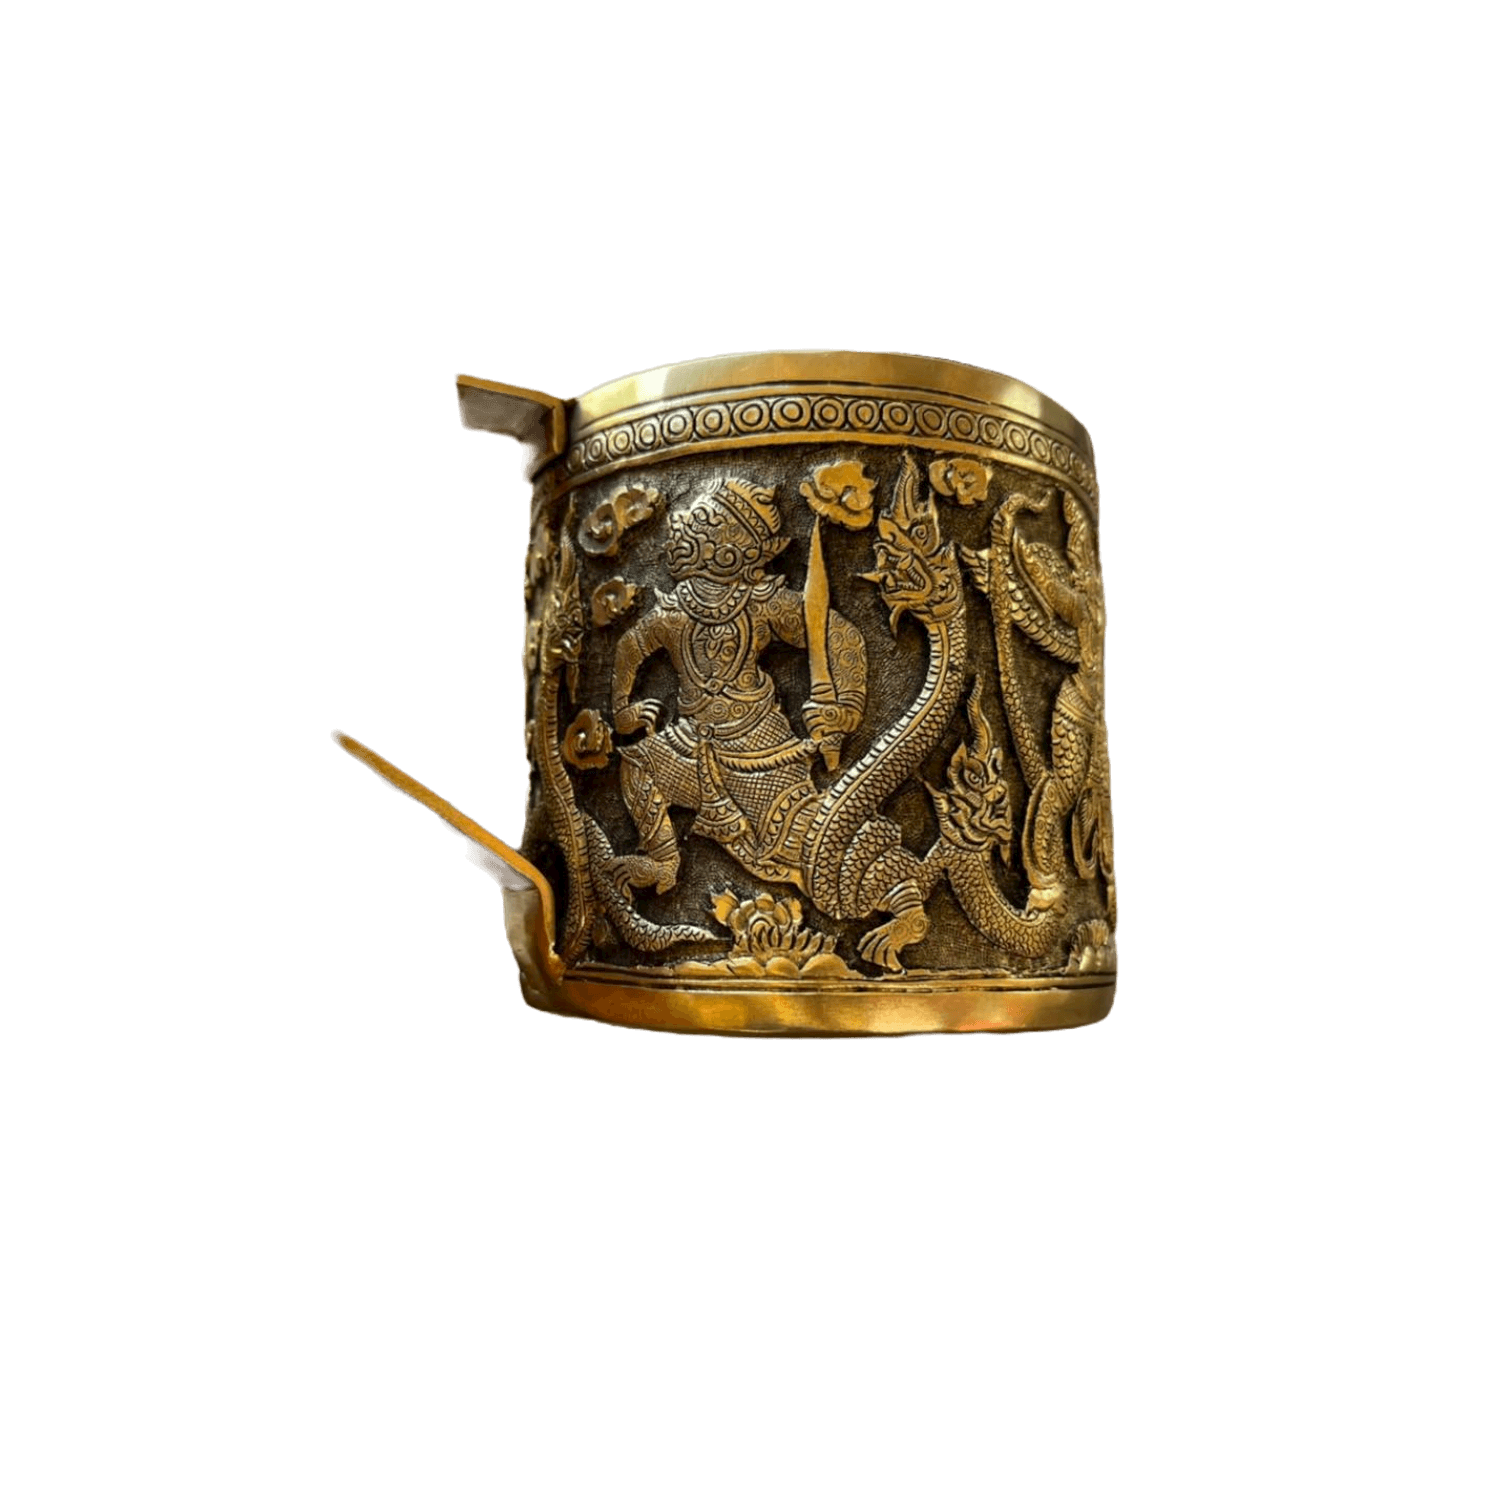 Hand Engraved Solid Brass Niello Betel Box Hand Engraved Solid Brass Mug with Handle - Godly World 